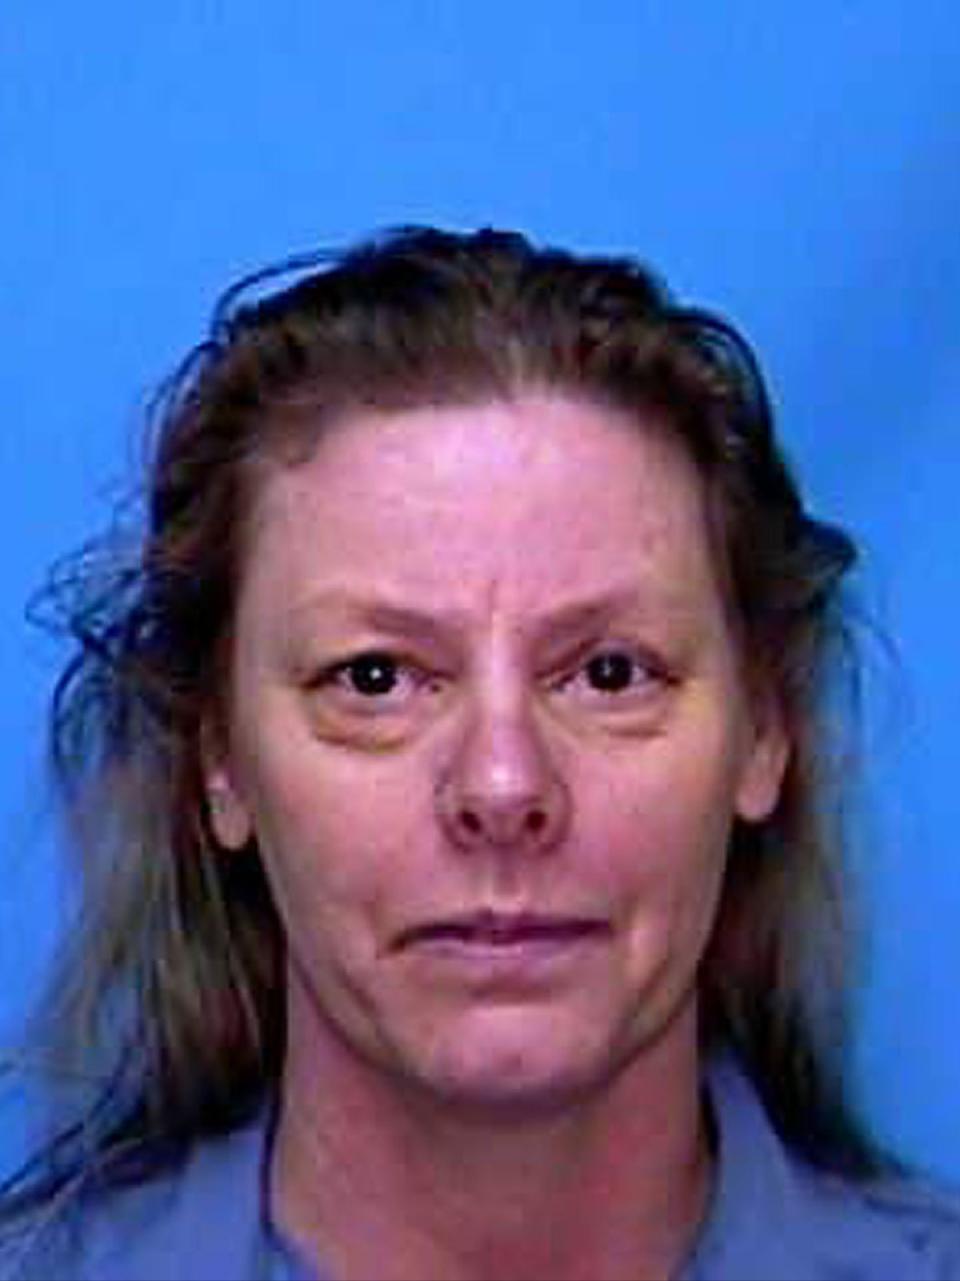 Aileen Wuornos is shown in this undated photograph from the Florida Department of Corrections (Getty)